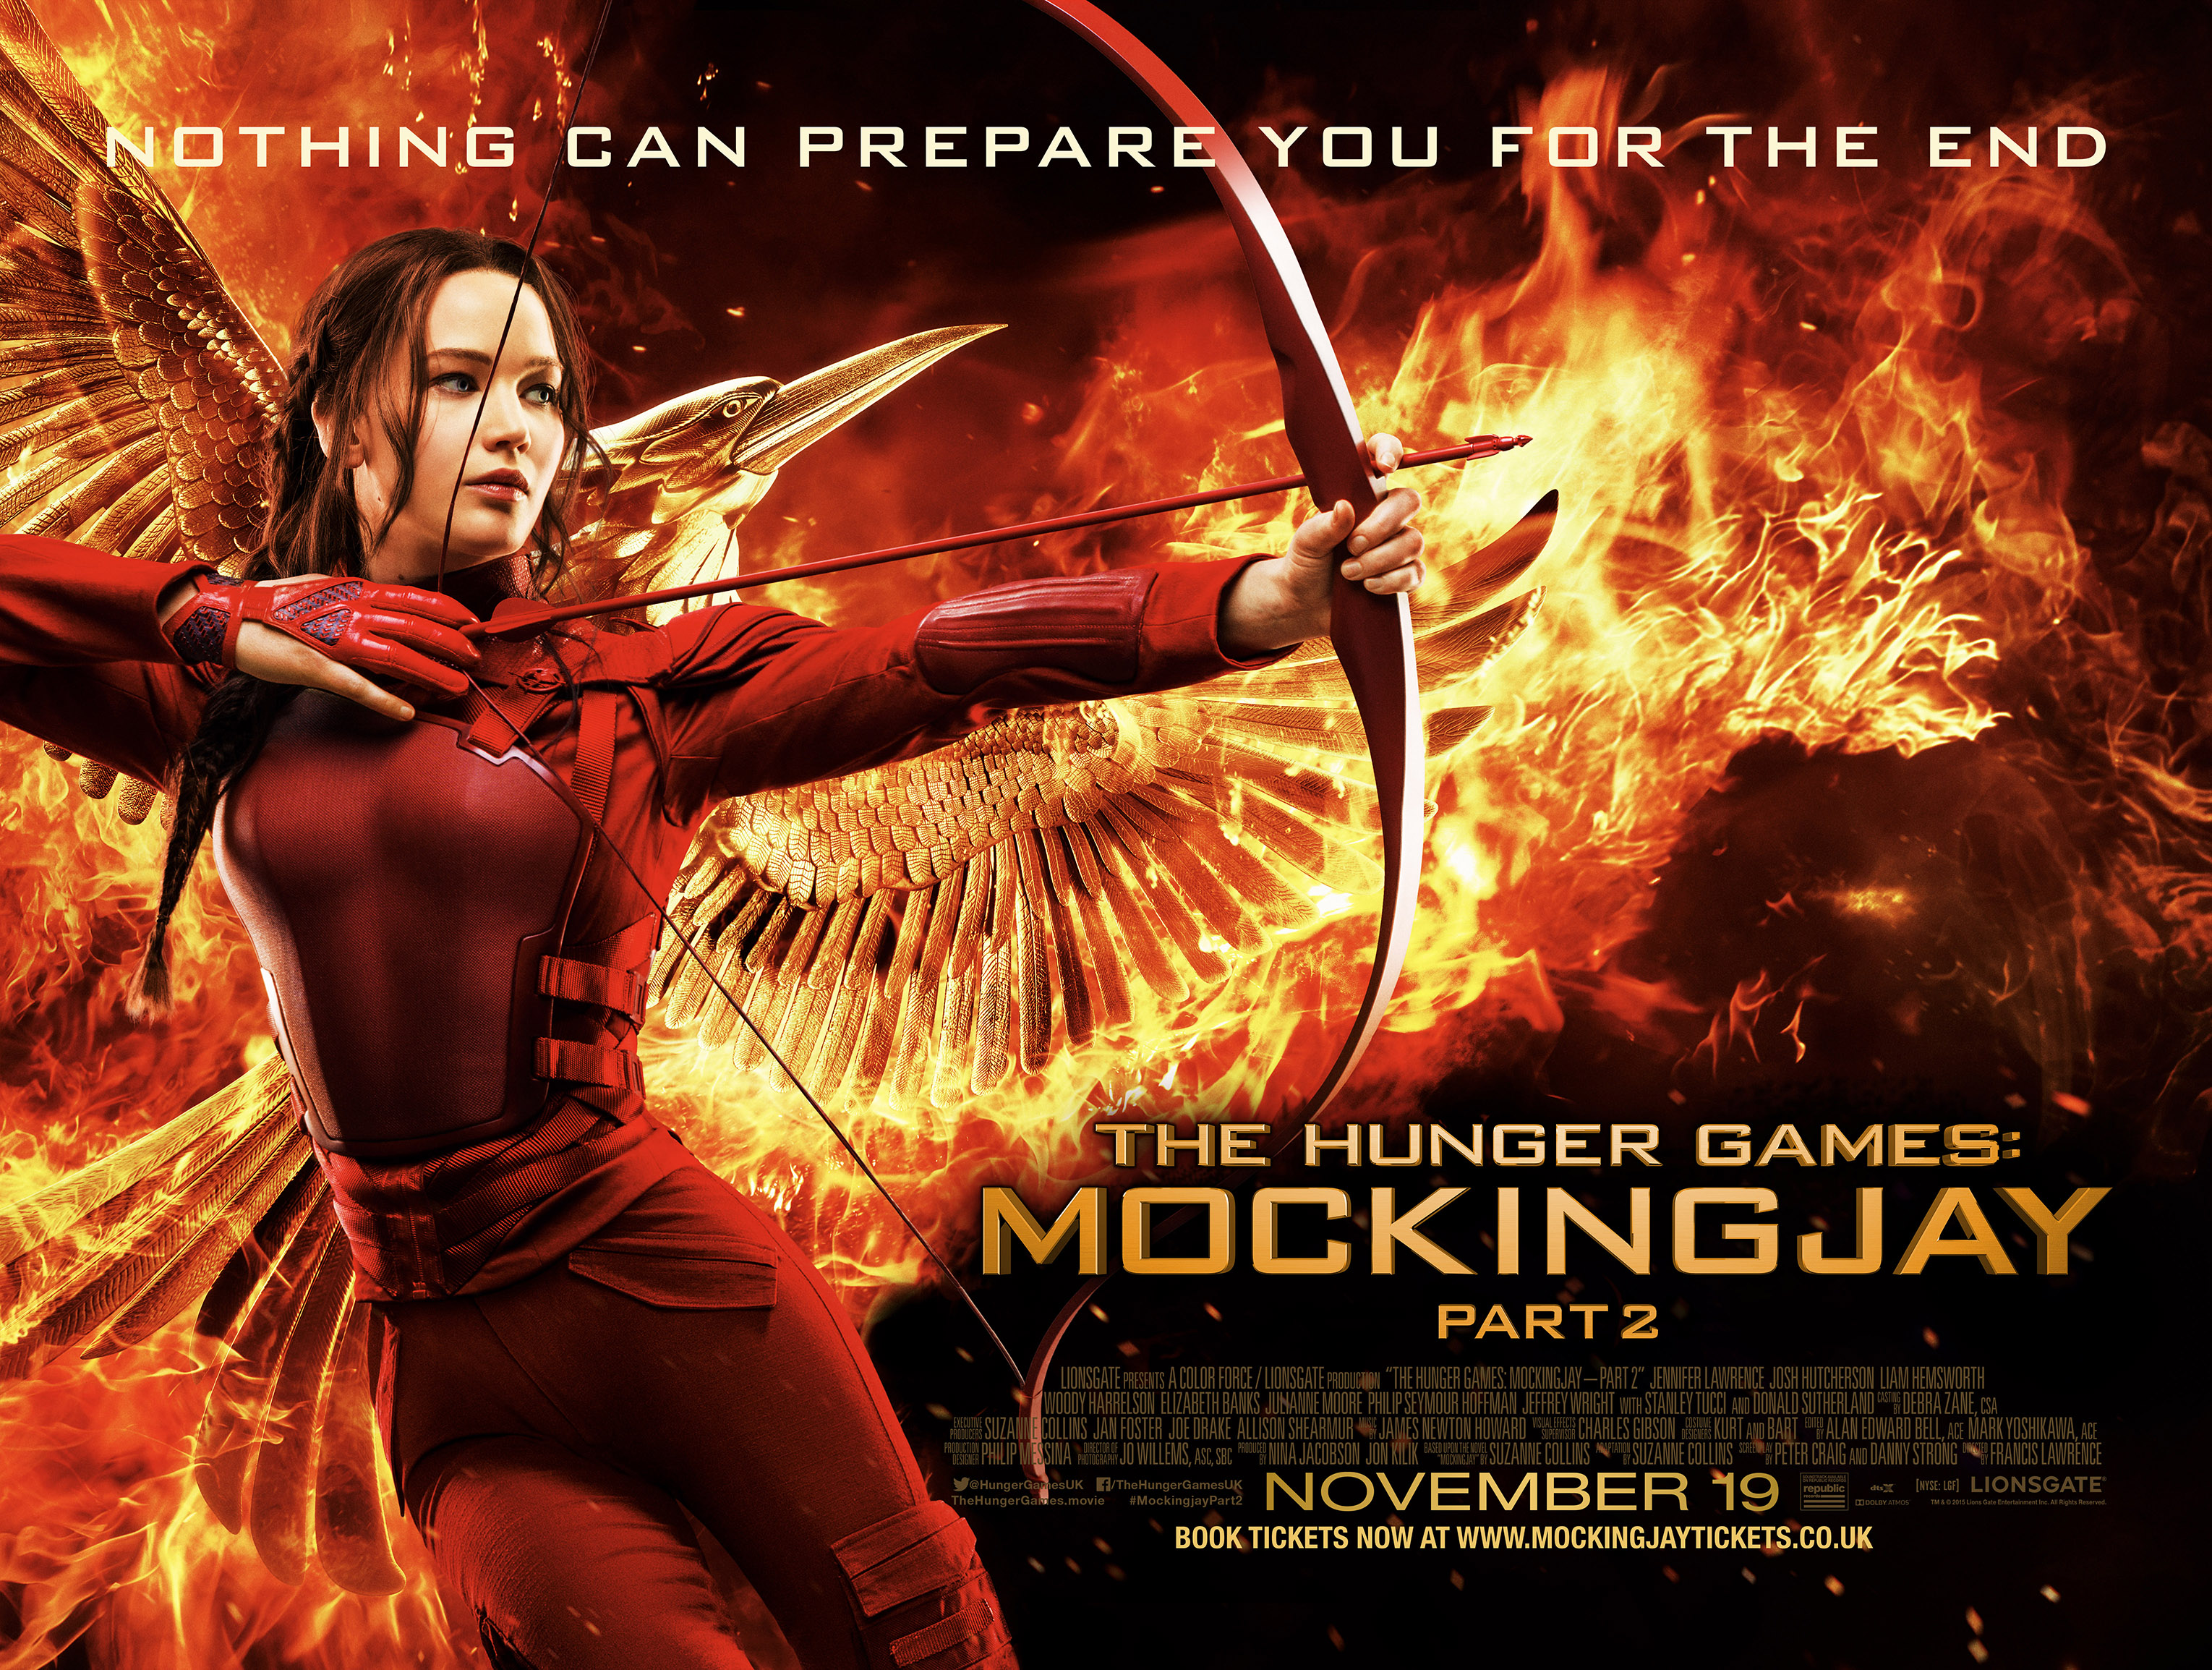 Where Can You Find The Hunger Games For Free